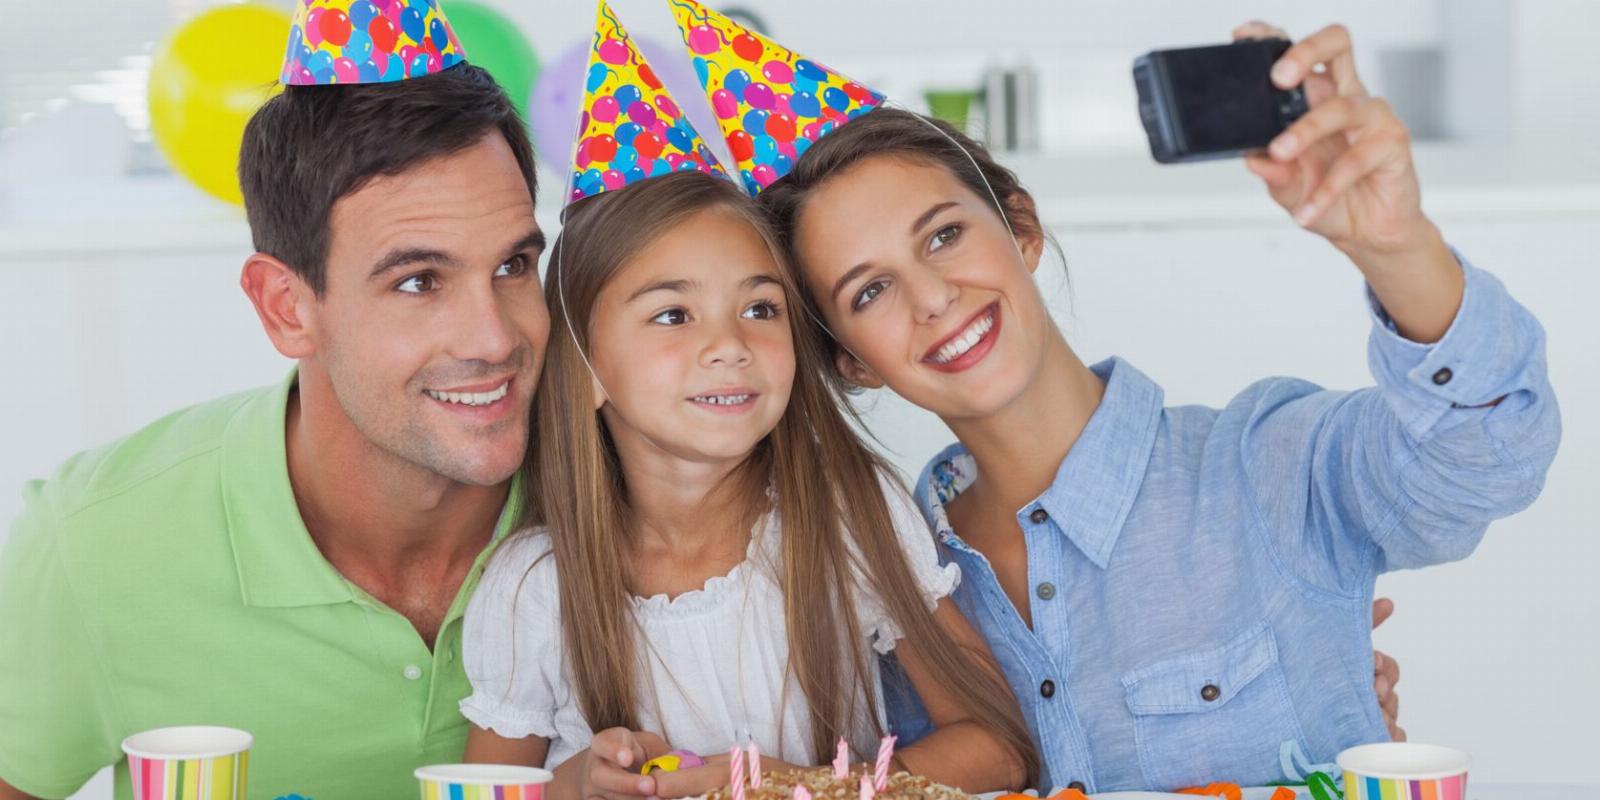 Why Instagram Forces You to Add Your Birthday